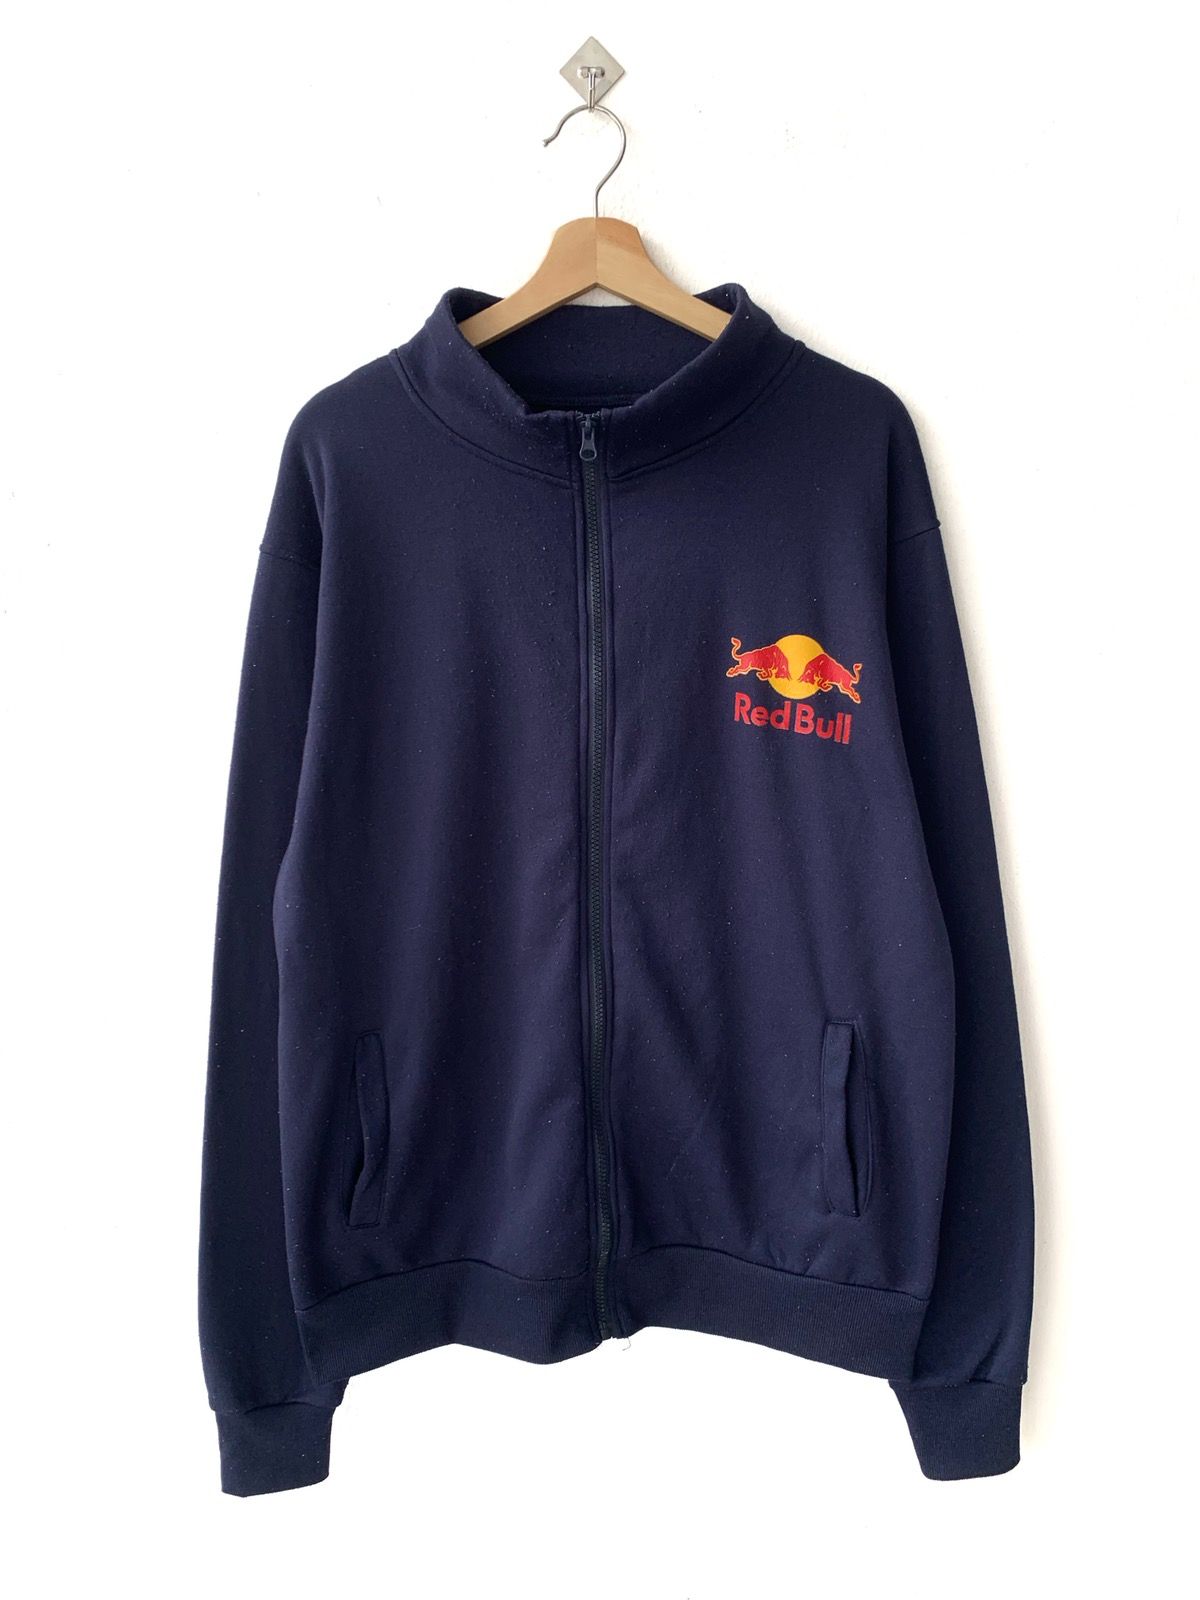 Red Bull Vintage Red Bull Sweatshirt Size US XL / EU 56 / 4 - 2 Preview